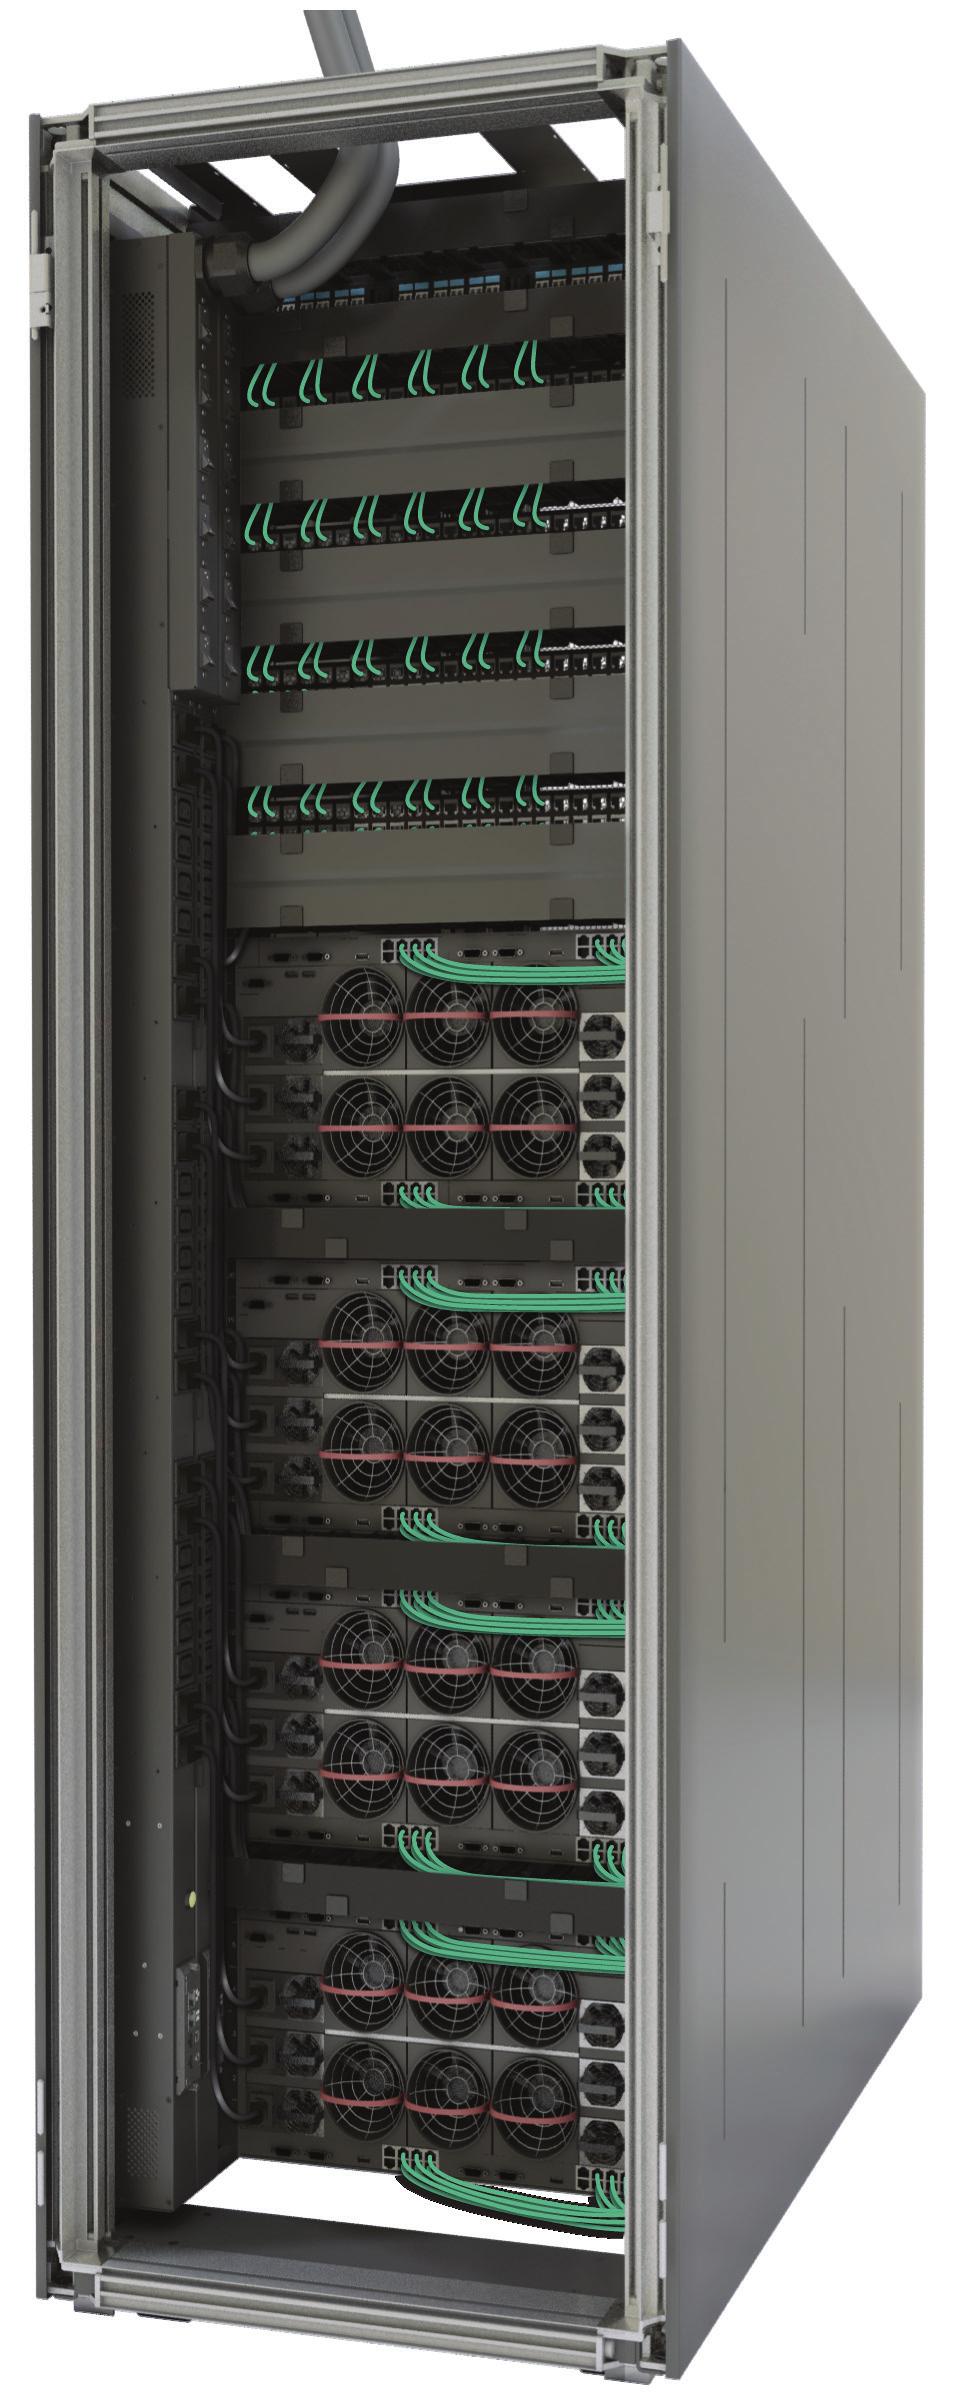 APPLYING PROPER CABLE MANAGEMENT IN IT RACKS Cable Management In Server Cabinets Vertical Cable Fingers 18U Part No. 010200078 with Cover - 2U 19 Part No.